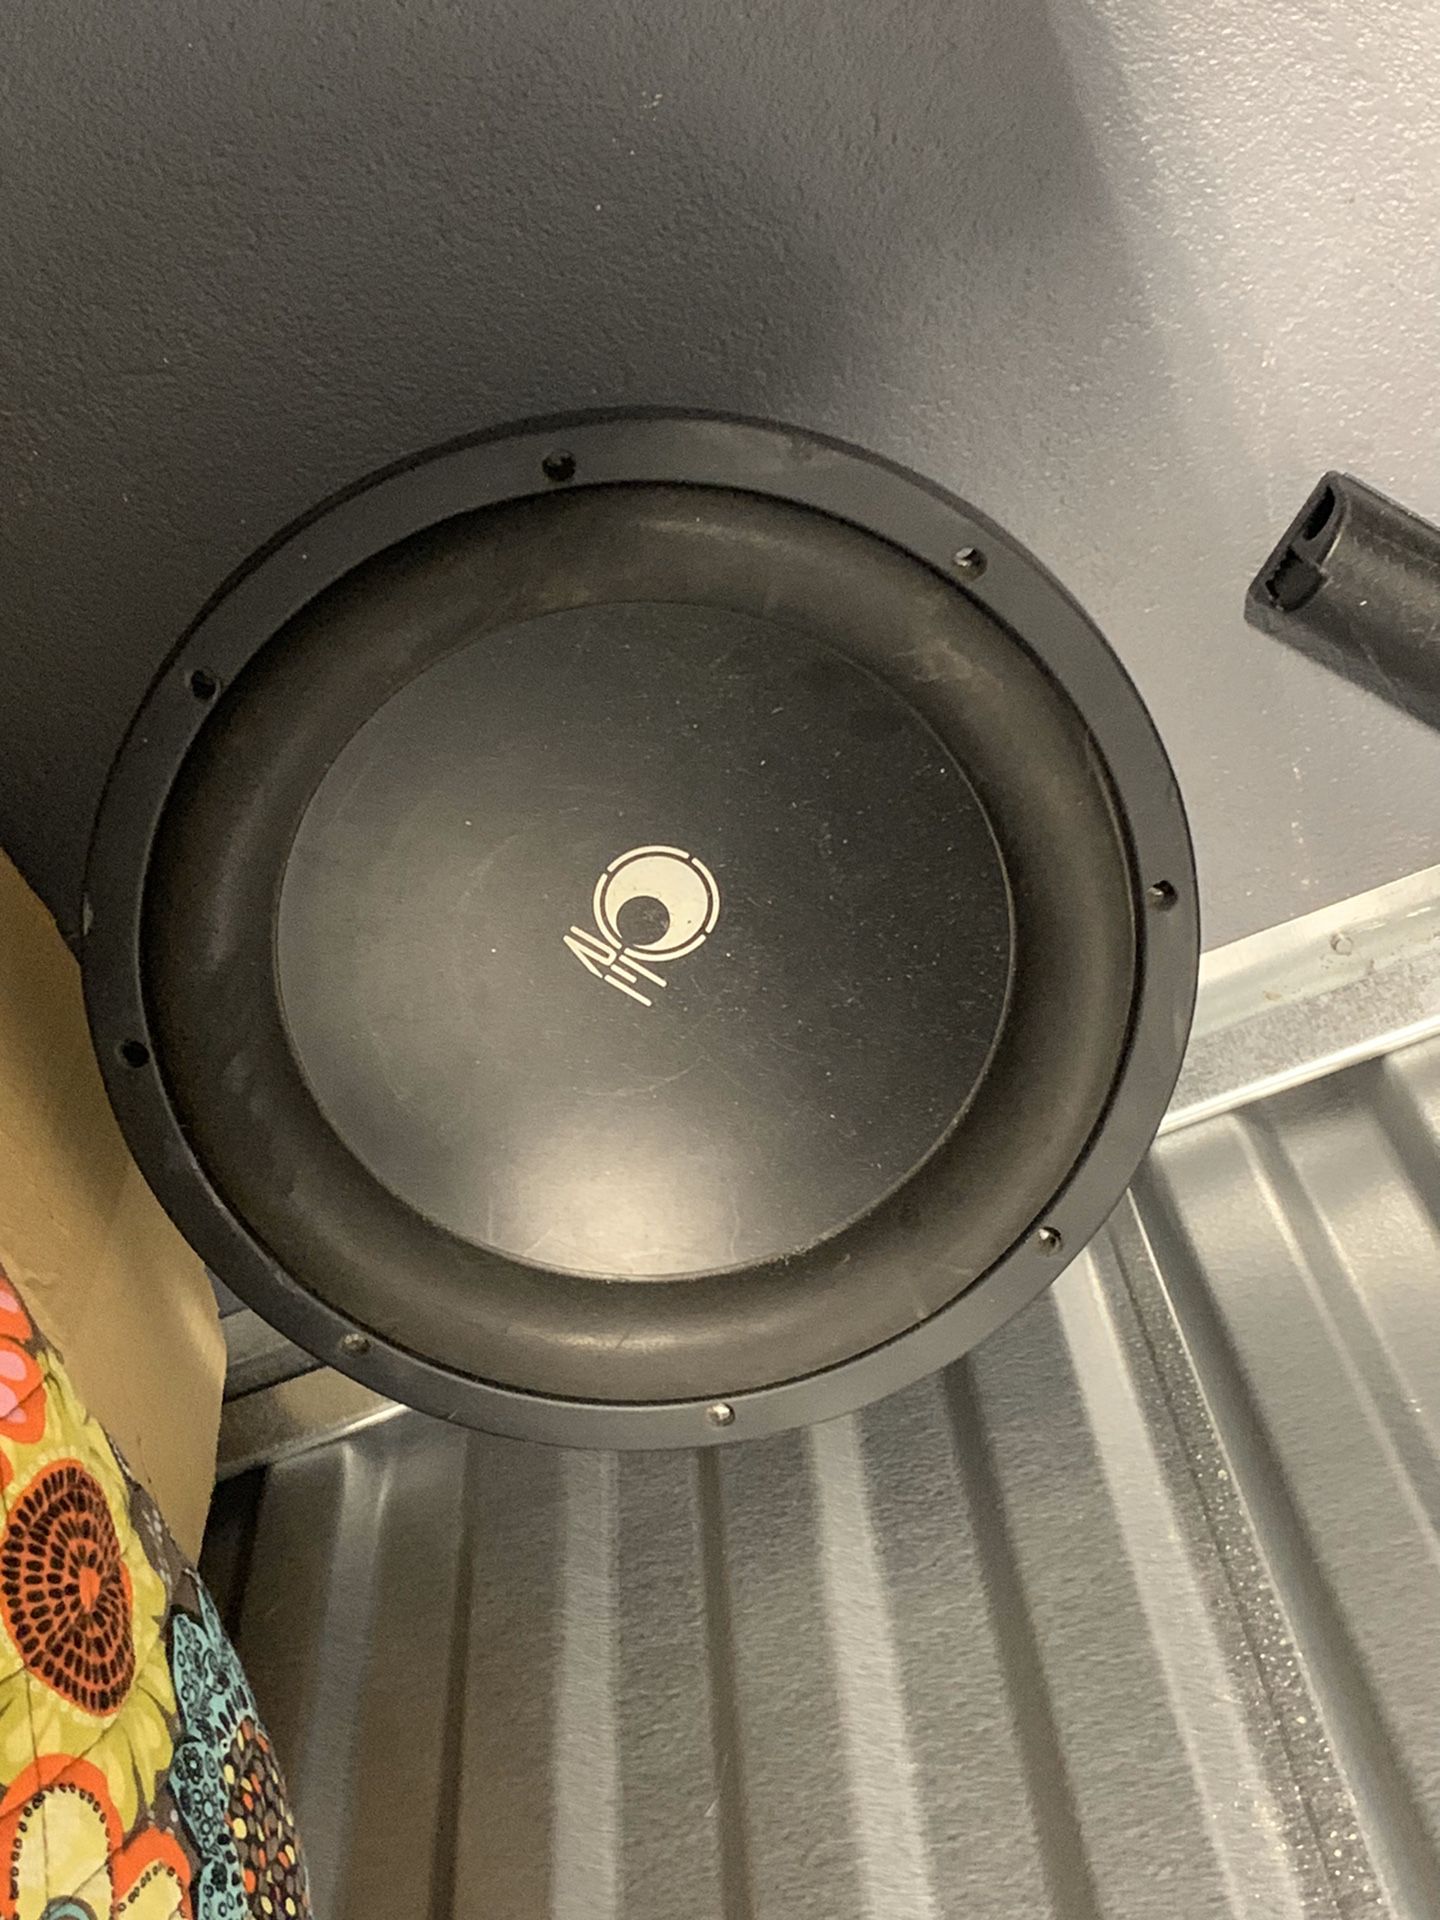 2 12” subwoofers